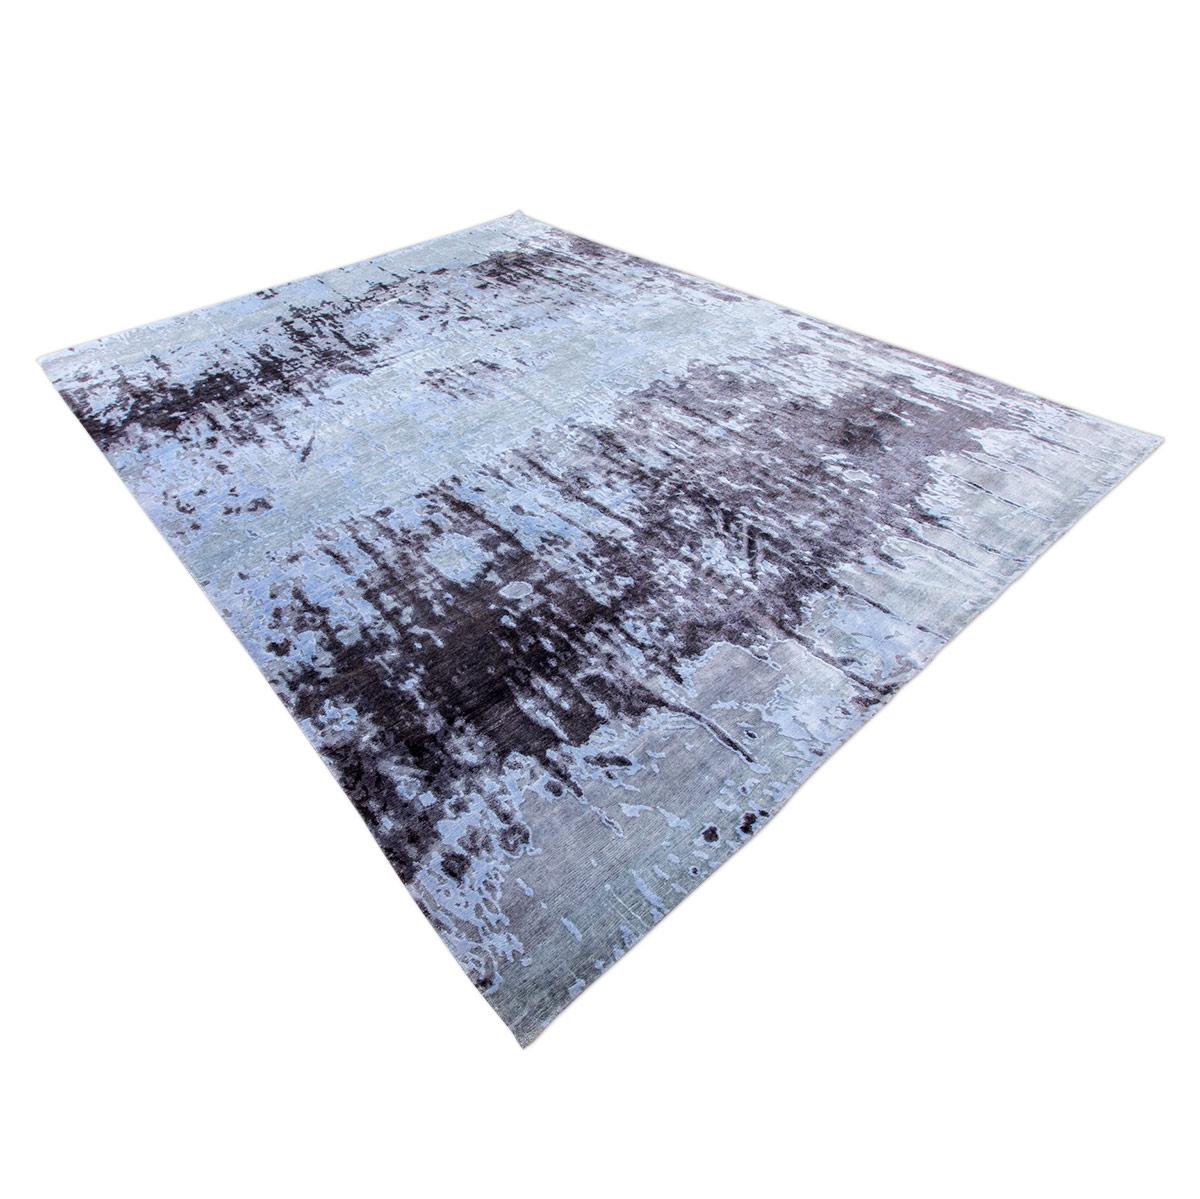 Hand-Woven Abstract Carpet. Design in Silk and Wool. 3.00 x 2.50 m. For Sale